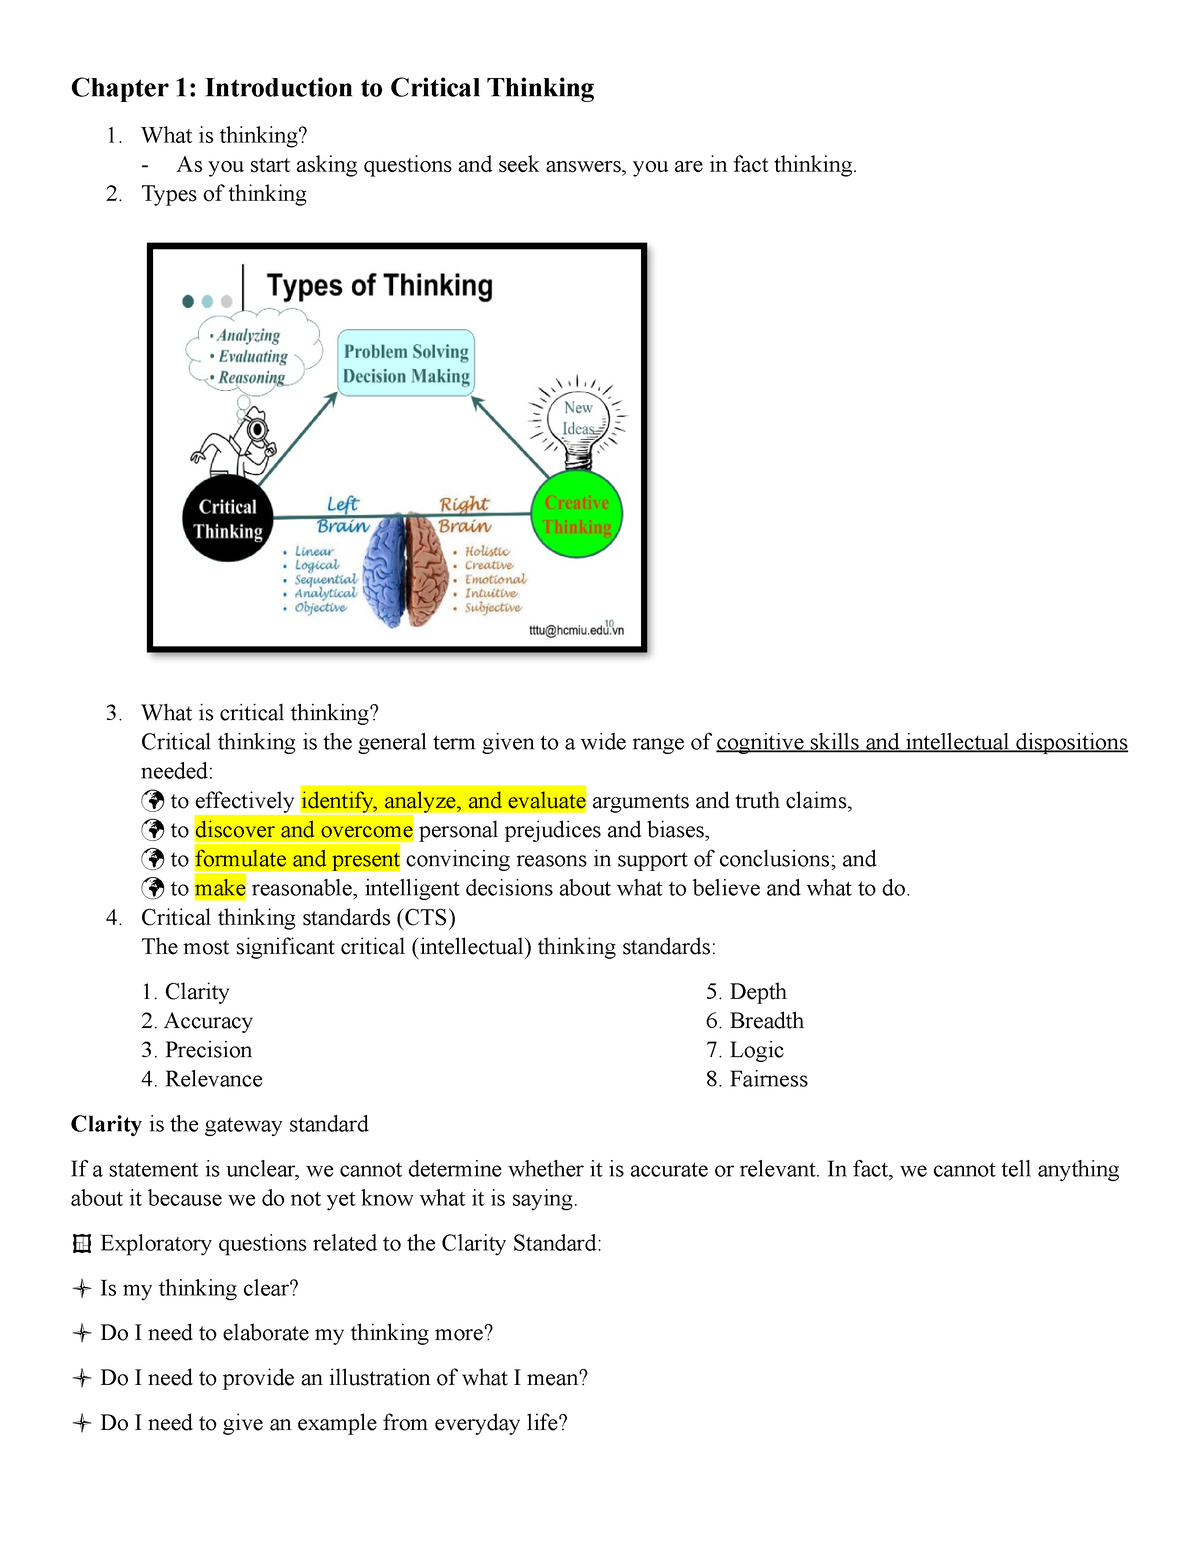 critical thinking chapter 1 answers